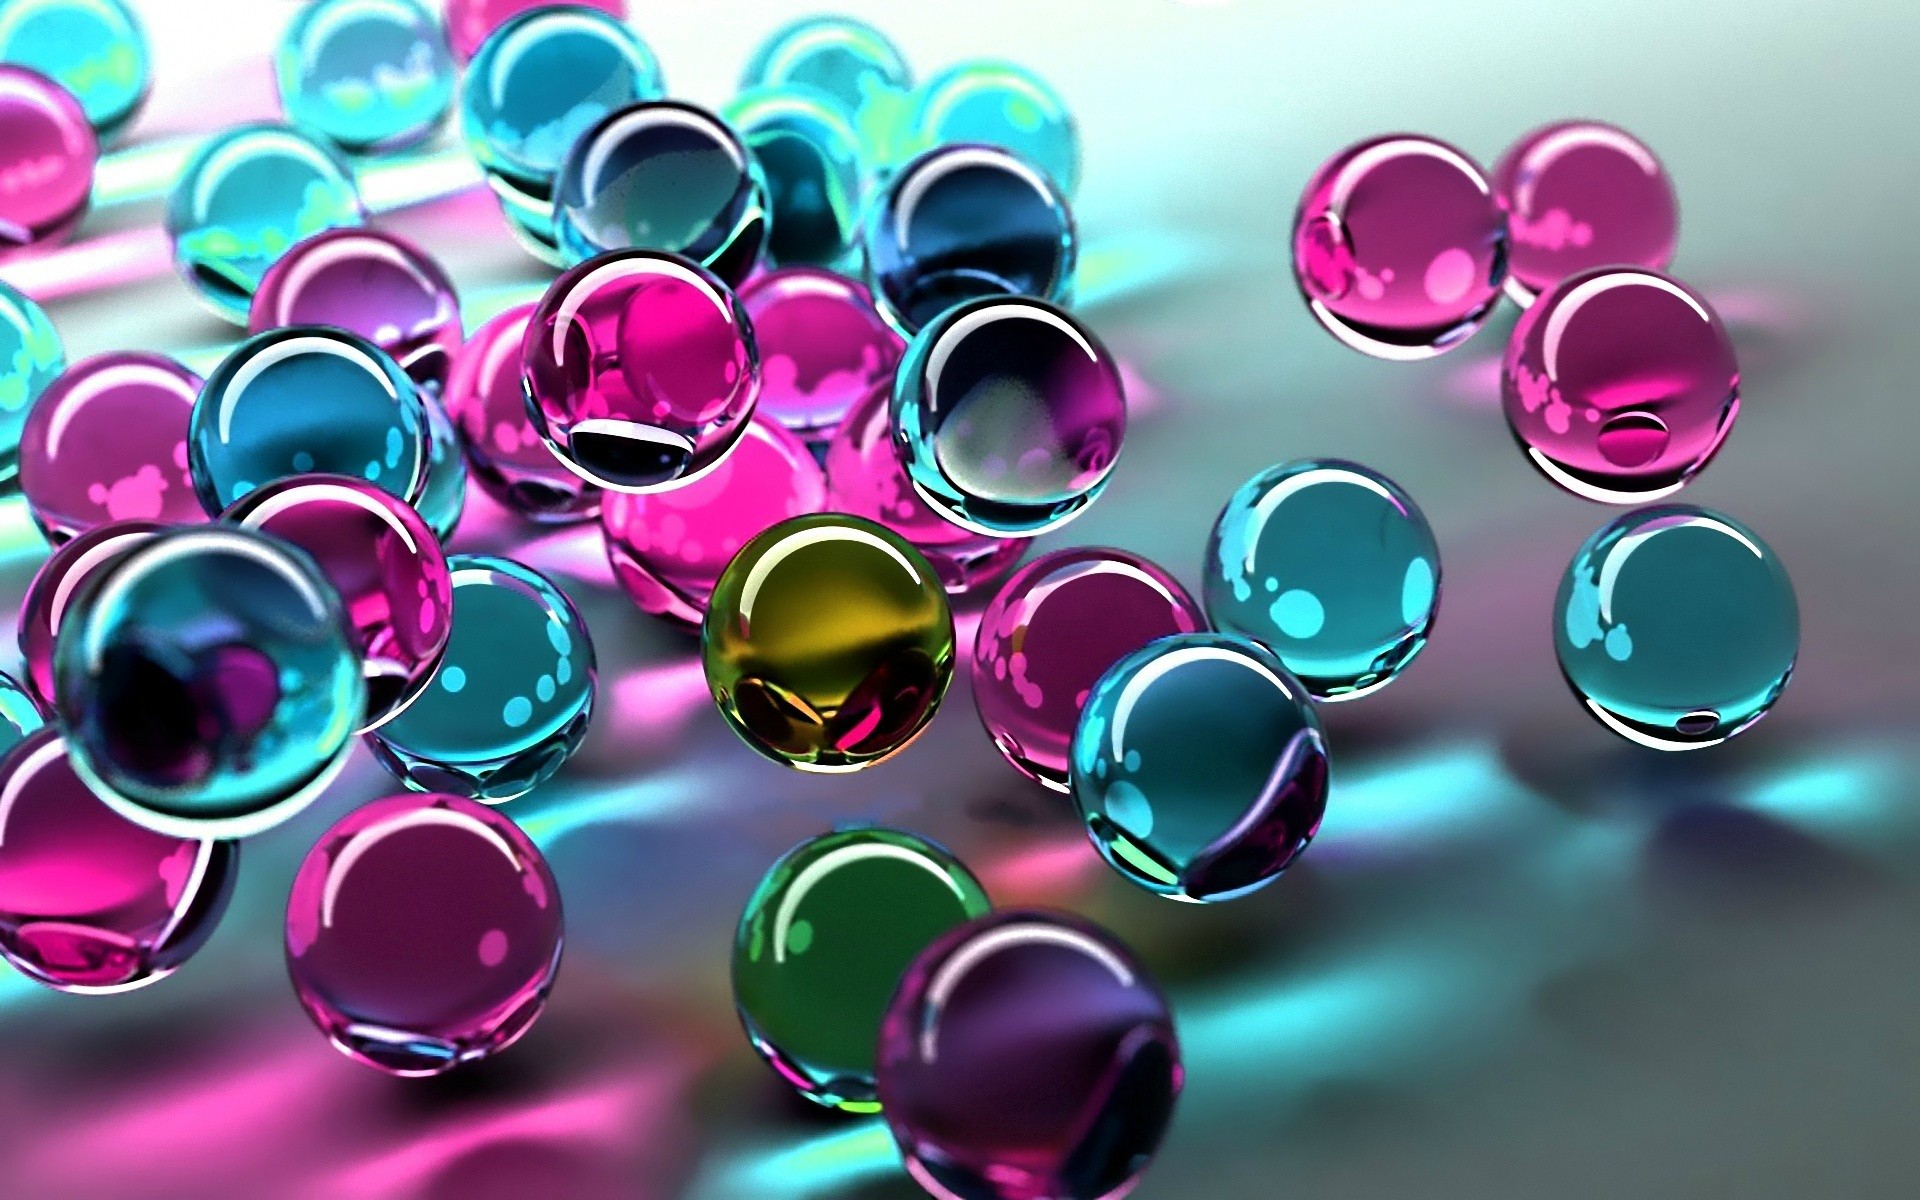 Many Marbles Colorful Wallpaper For Android With